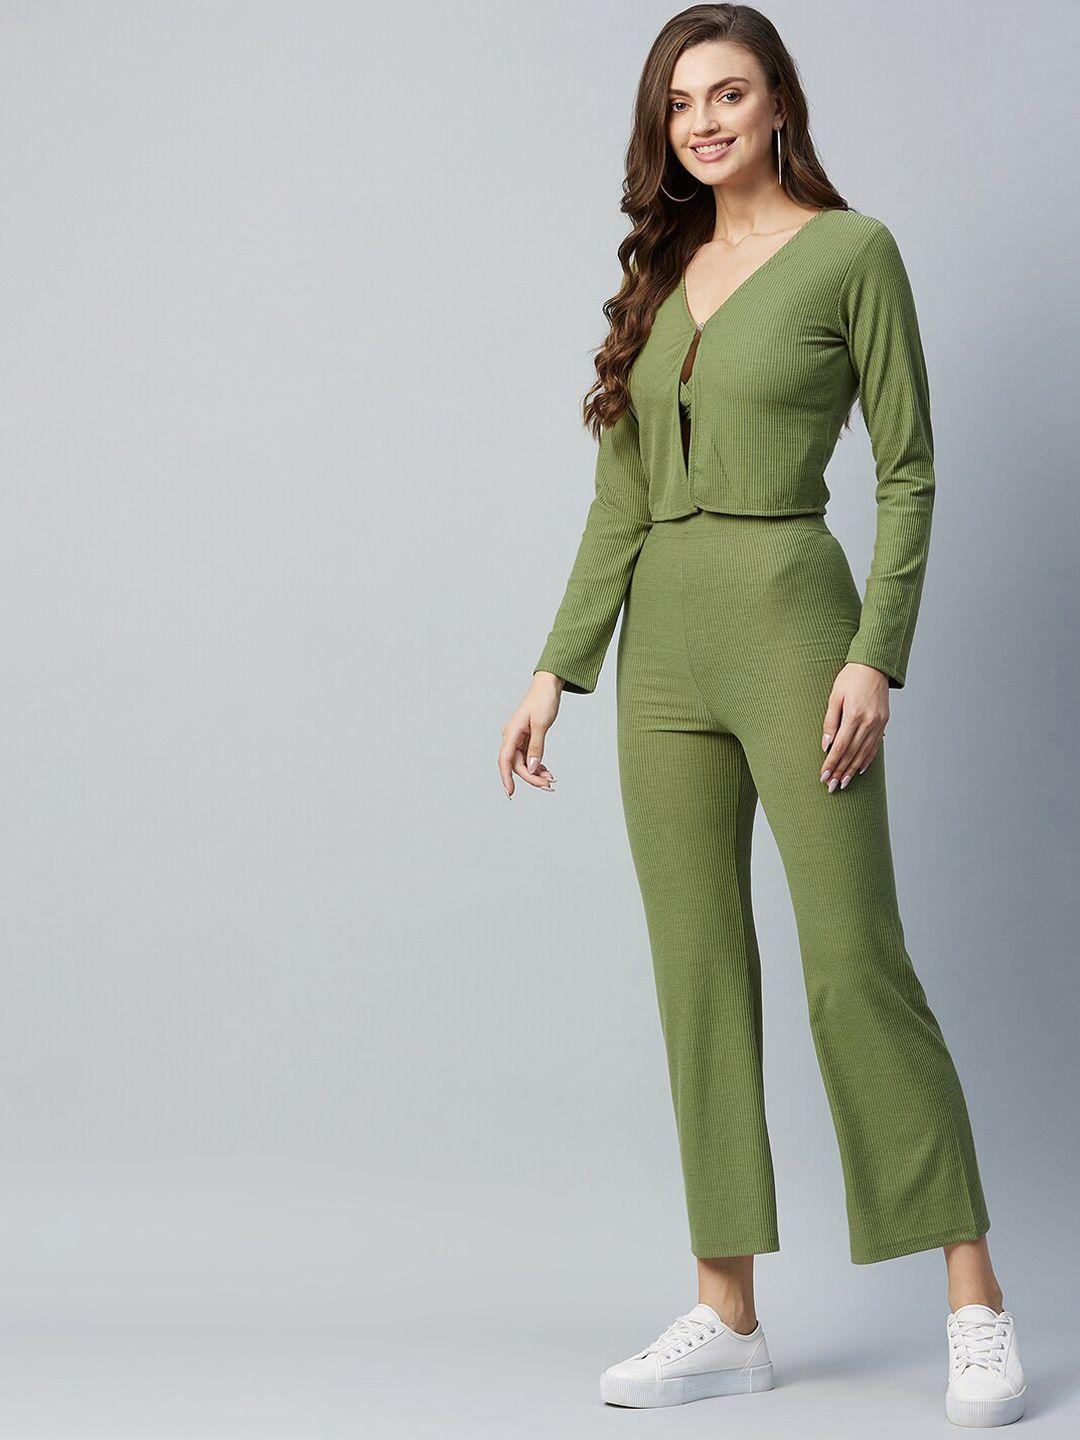 delan women green solid cotton co-ords